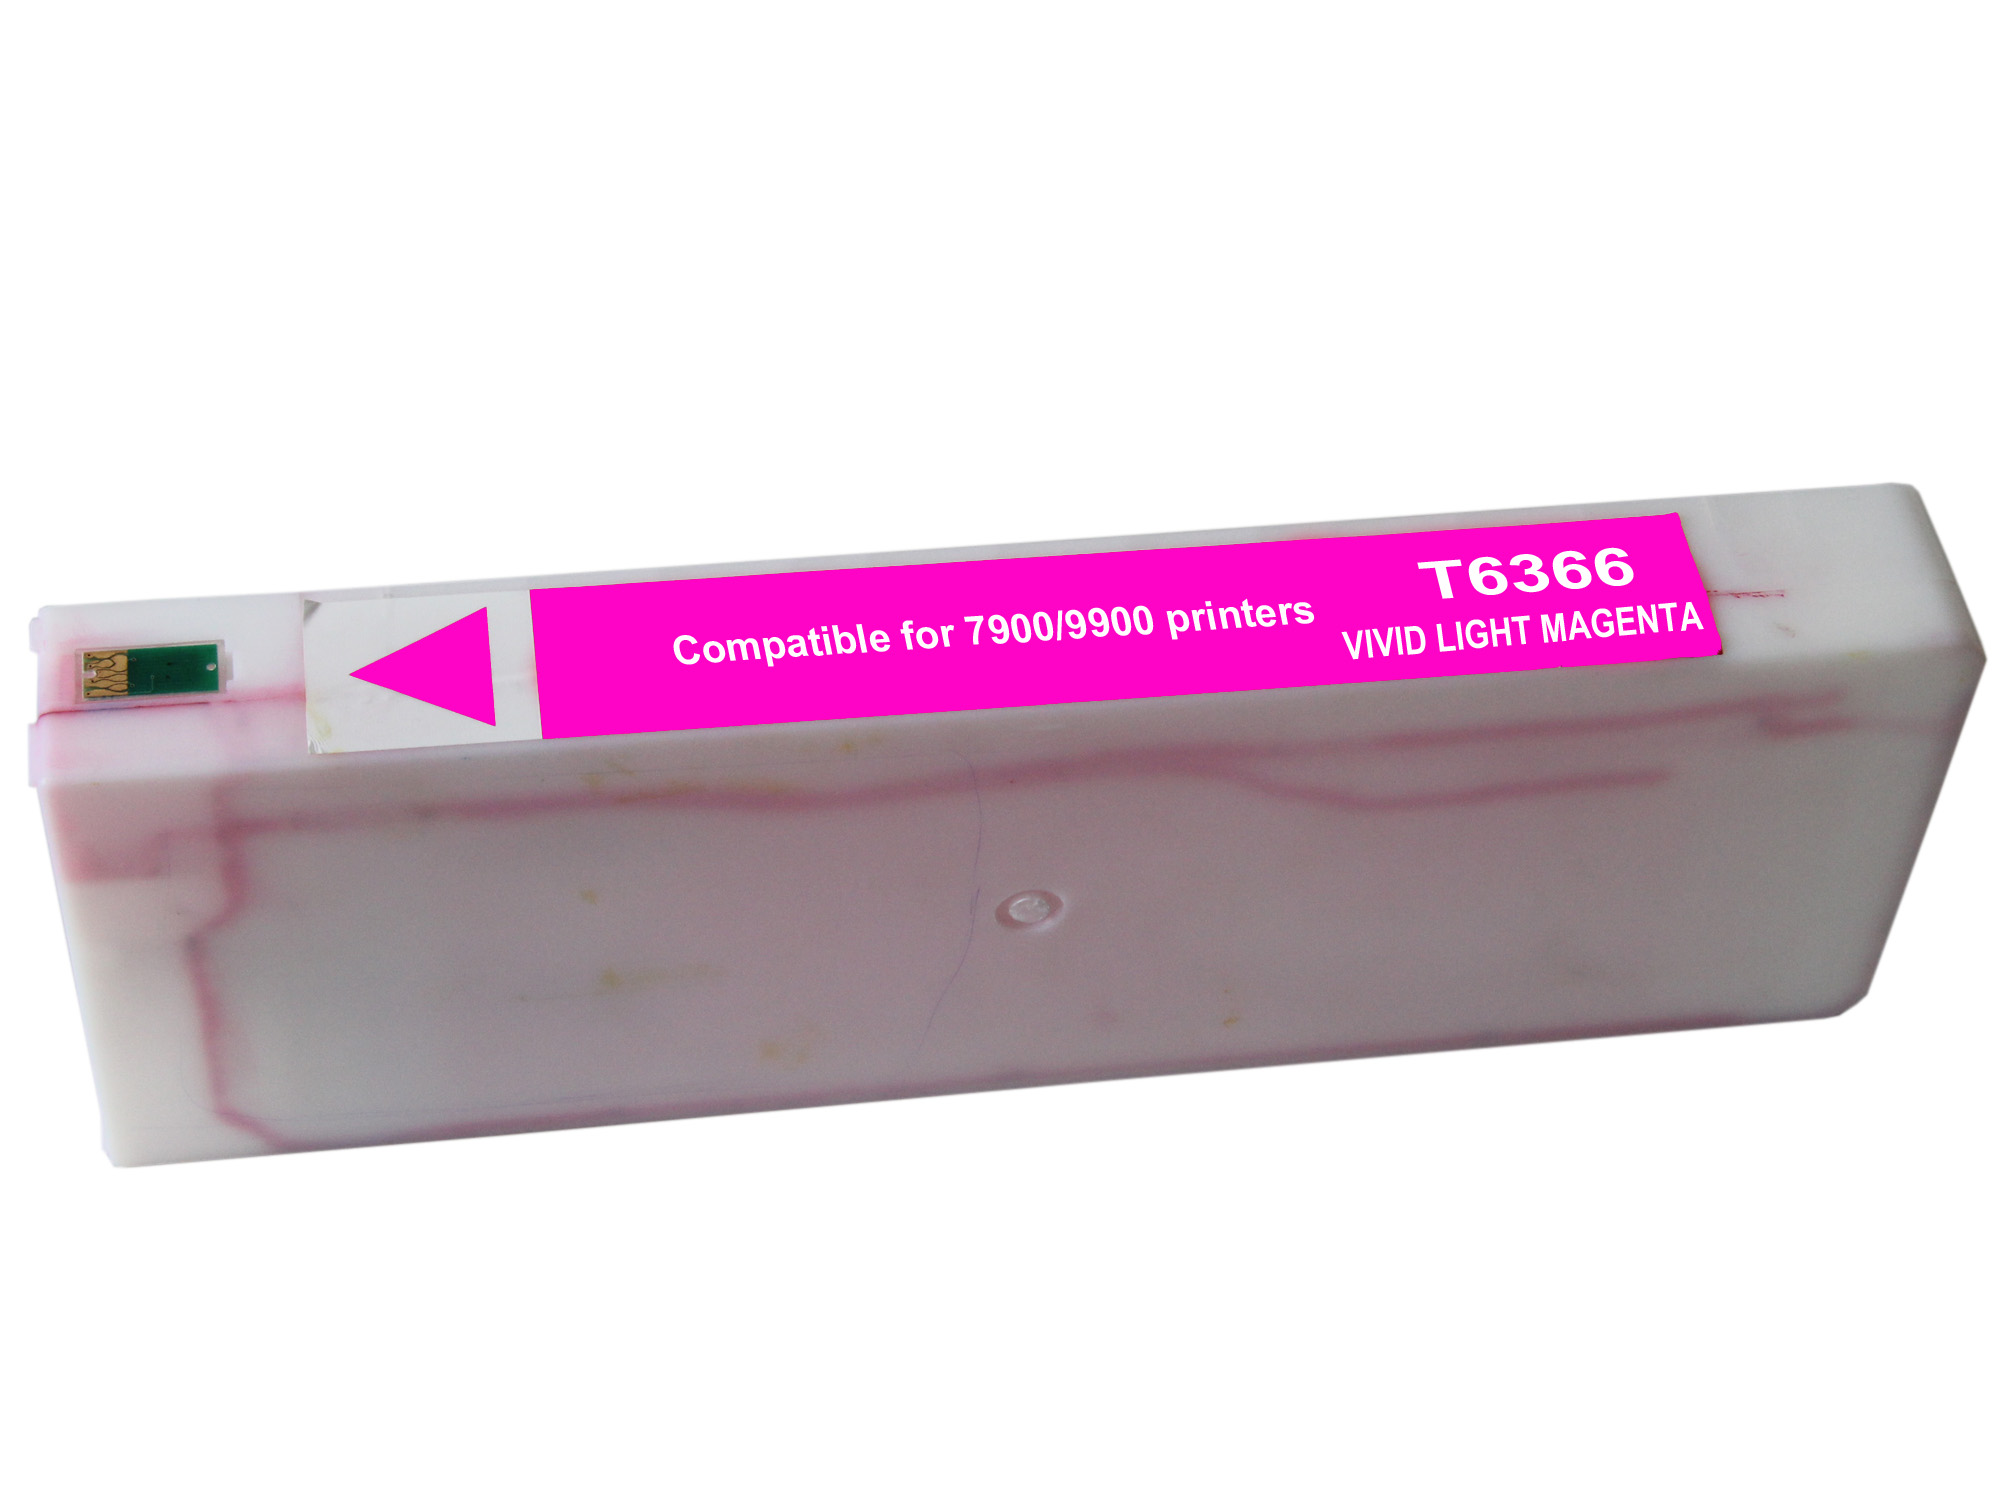 Premium Quality Light Magenta UltraChrome HDR Ink Cartridge compatible with Epson T636600